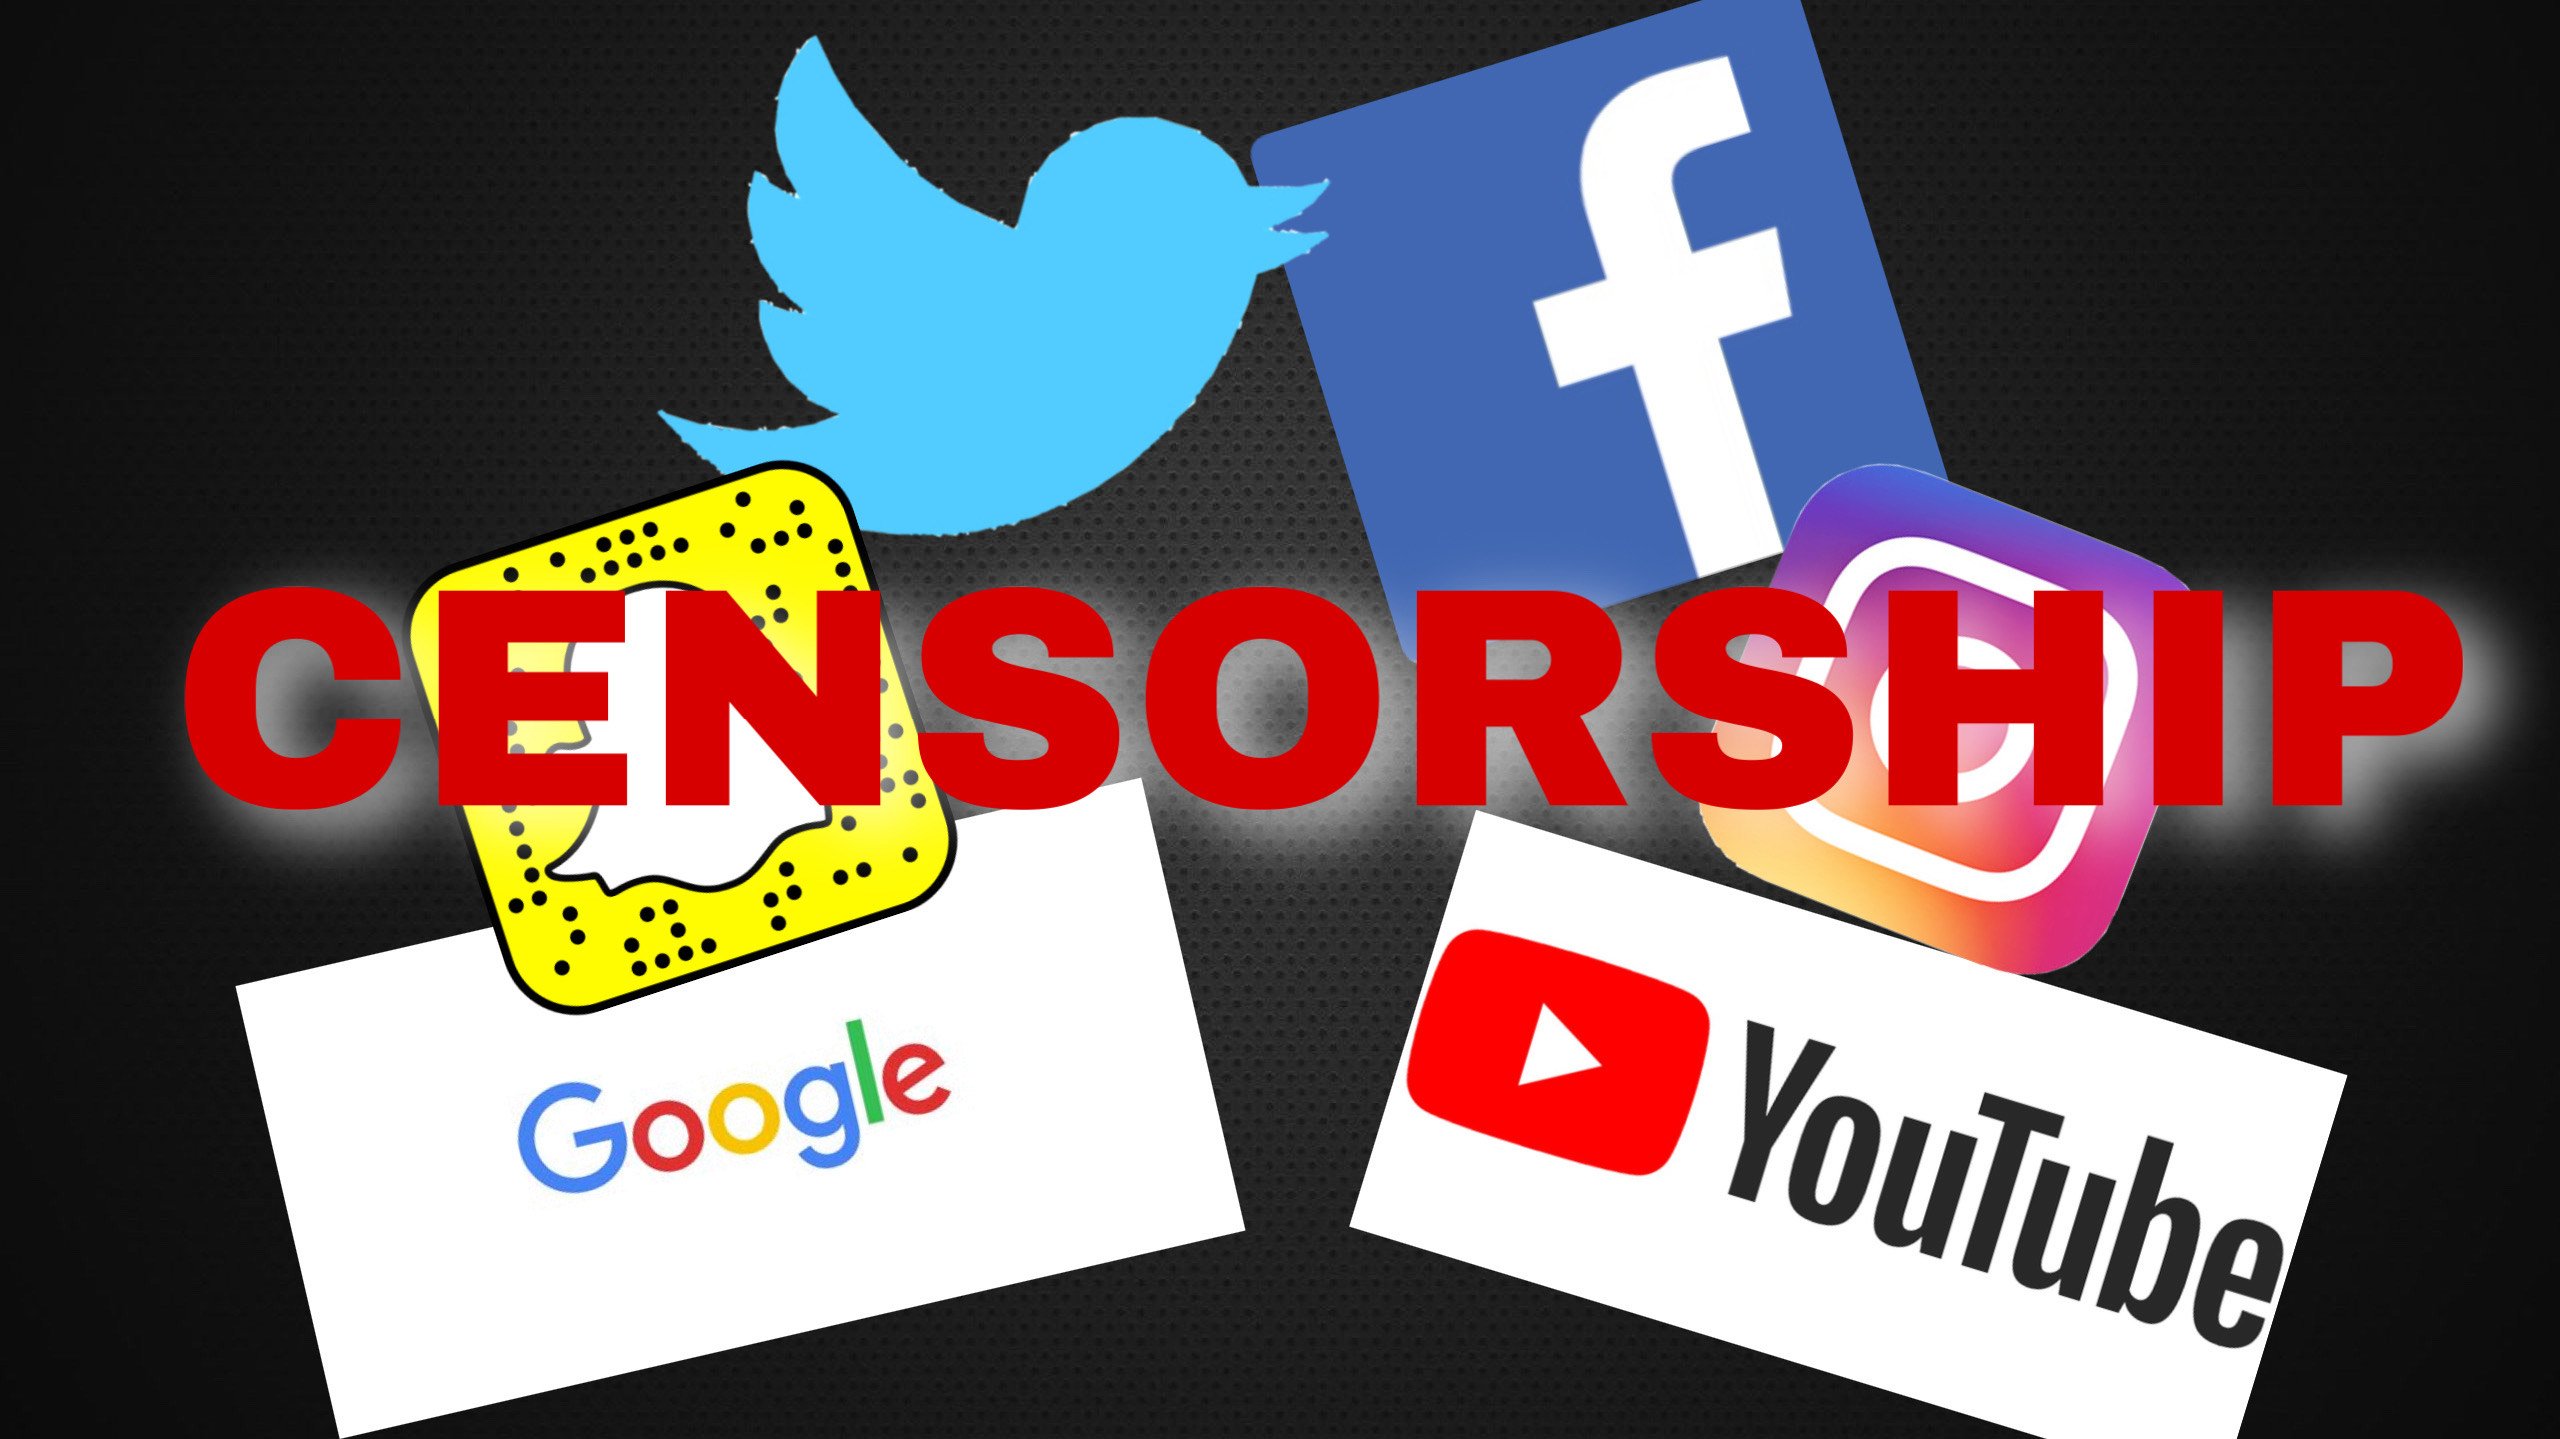 BREAKING EXCLUSIVE: Big Tech Censorship Is the Largest Campaign Finance Violation in History Costing Americans Billions